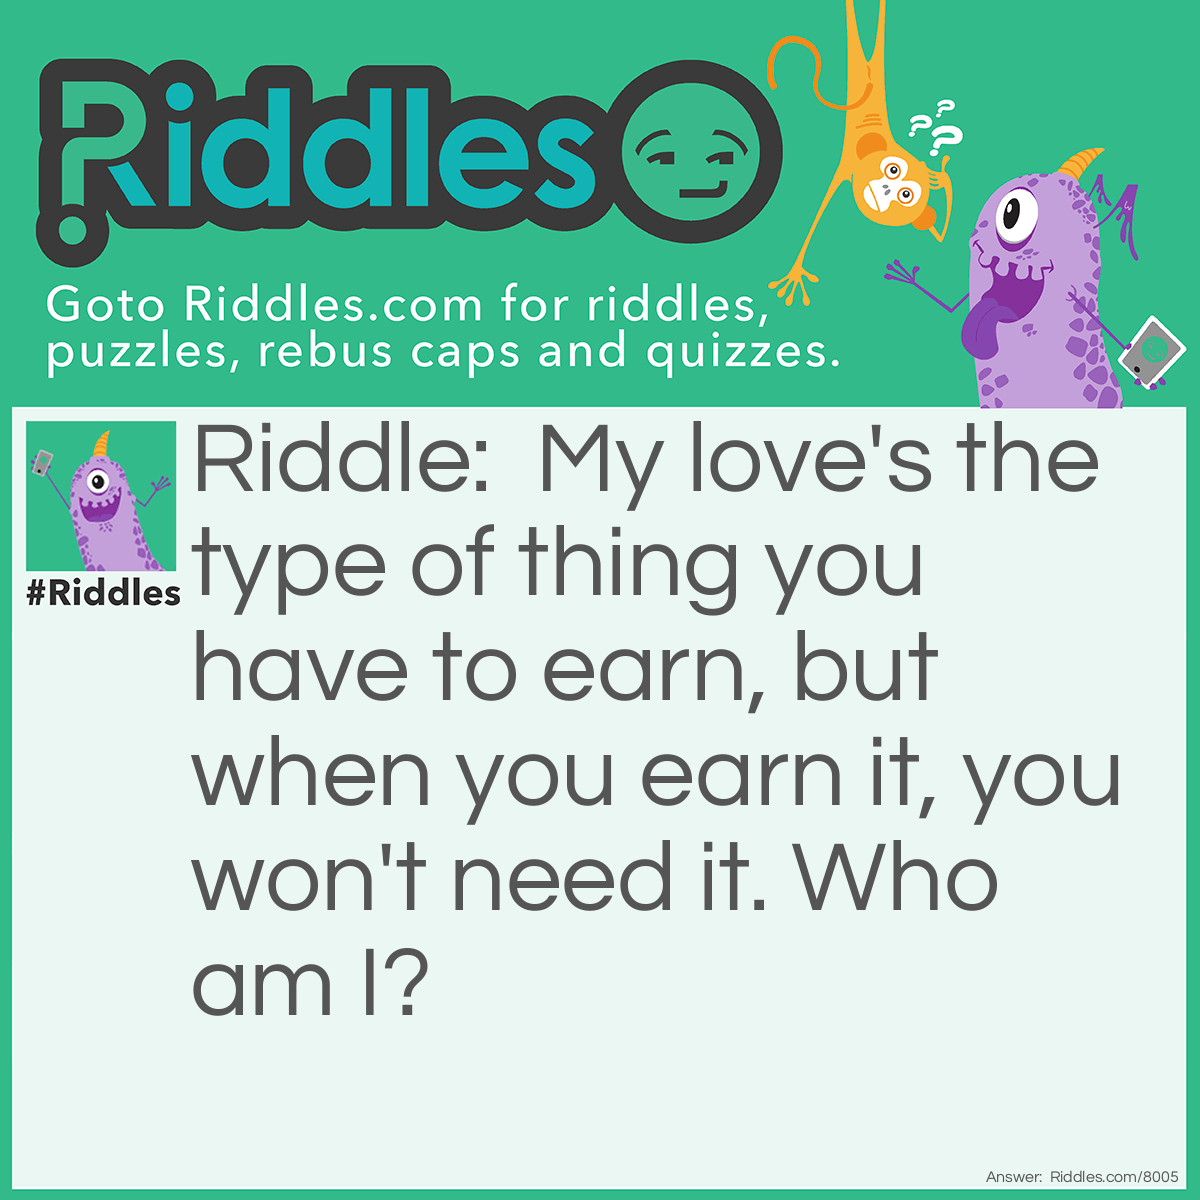 Riddle: My love's the type of thing you have to earn, but when you earn it, you won't need it. Who am I? Answer: God. Credit: Bo Burnham, Musical Comedian, Song title- "God's Perspective".